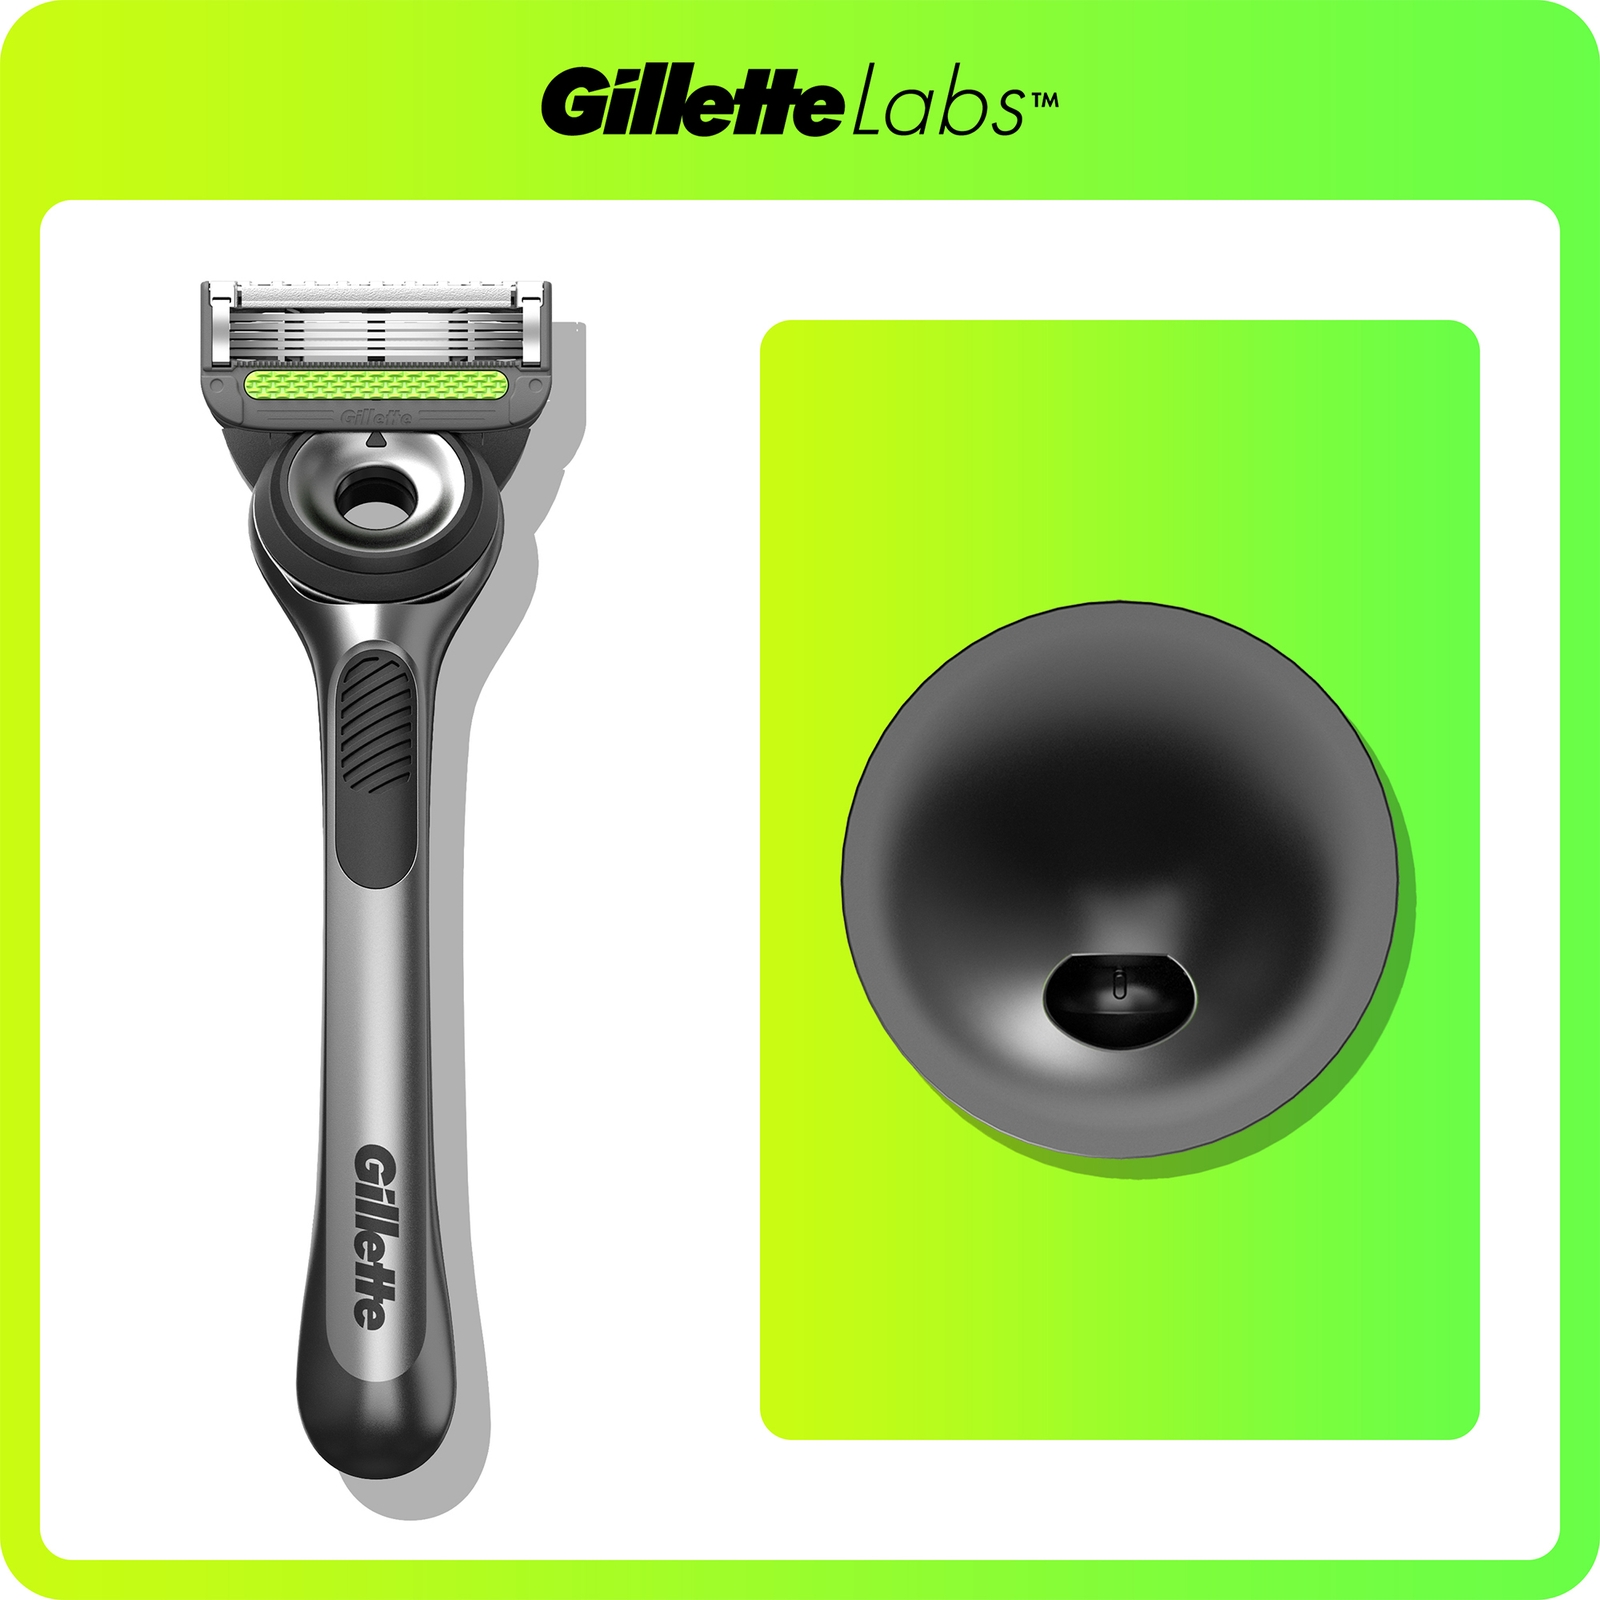 Gillette Labs Razor with Exfoliating Bar Silver